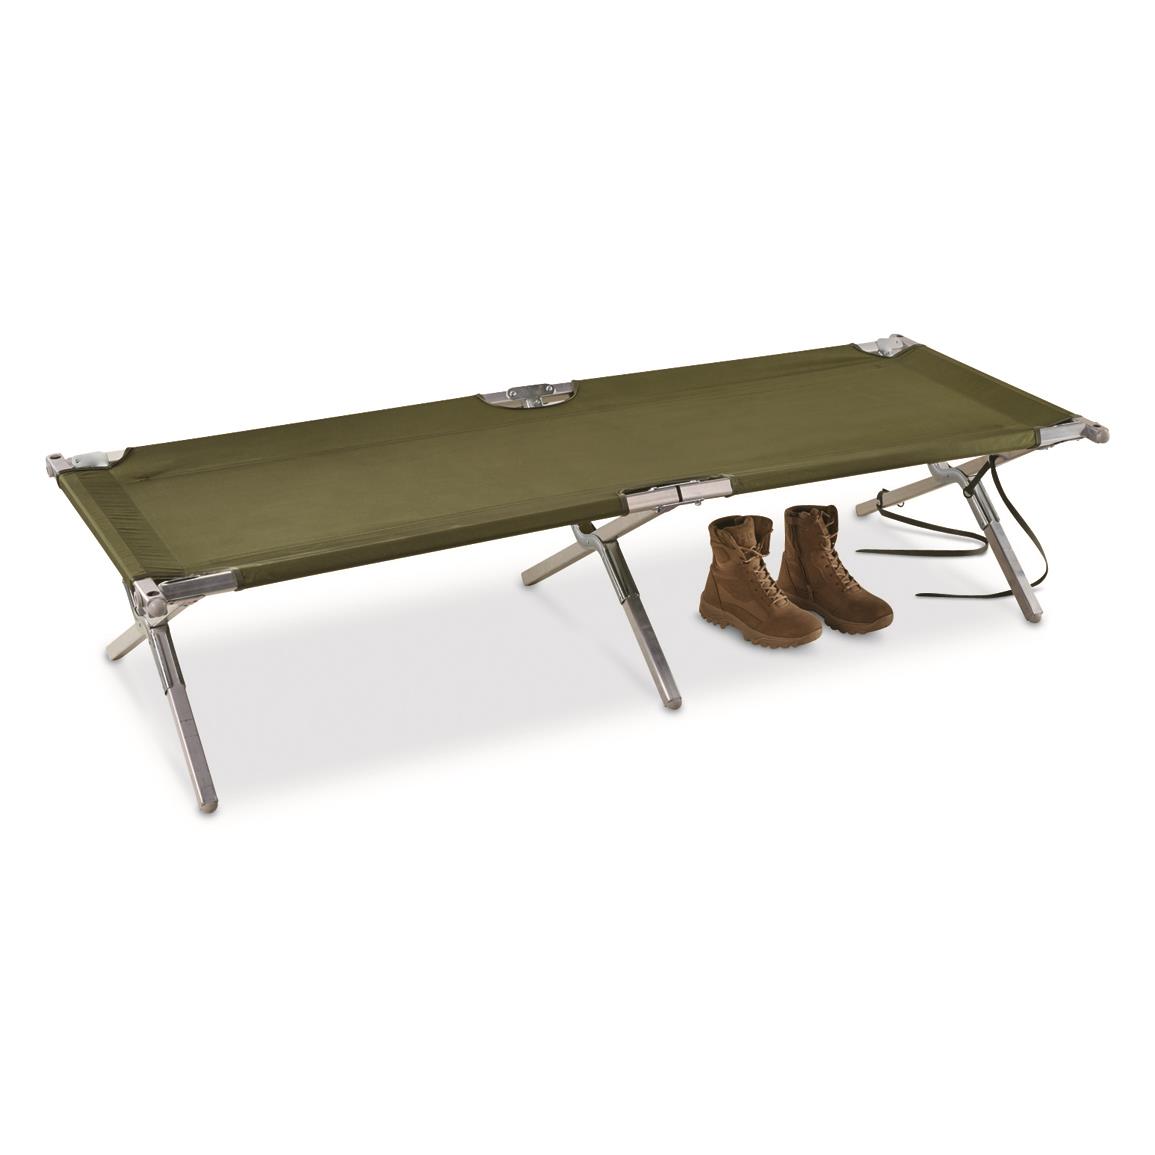 U.S. Military Surplus Cot, New 703758, Military Folding Cots at